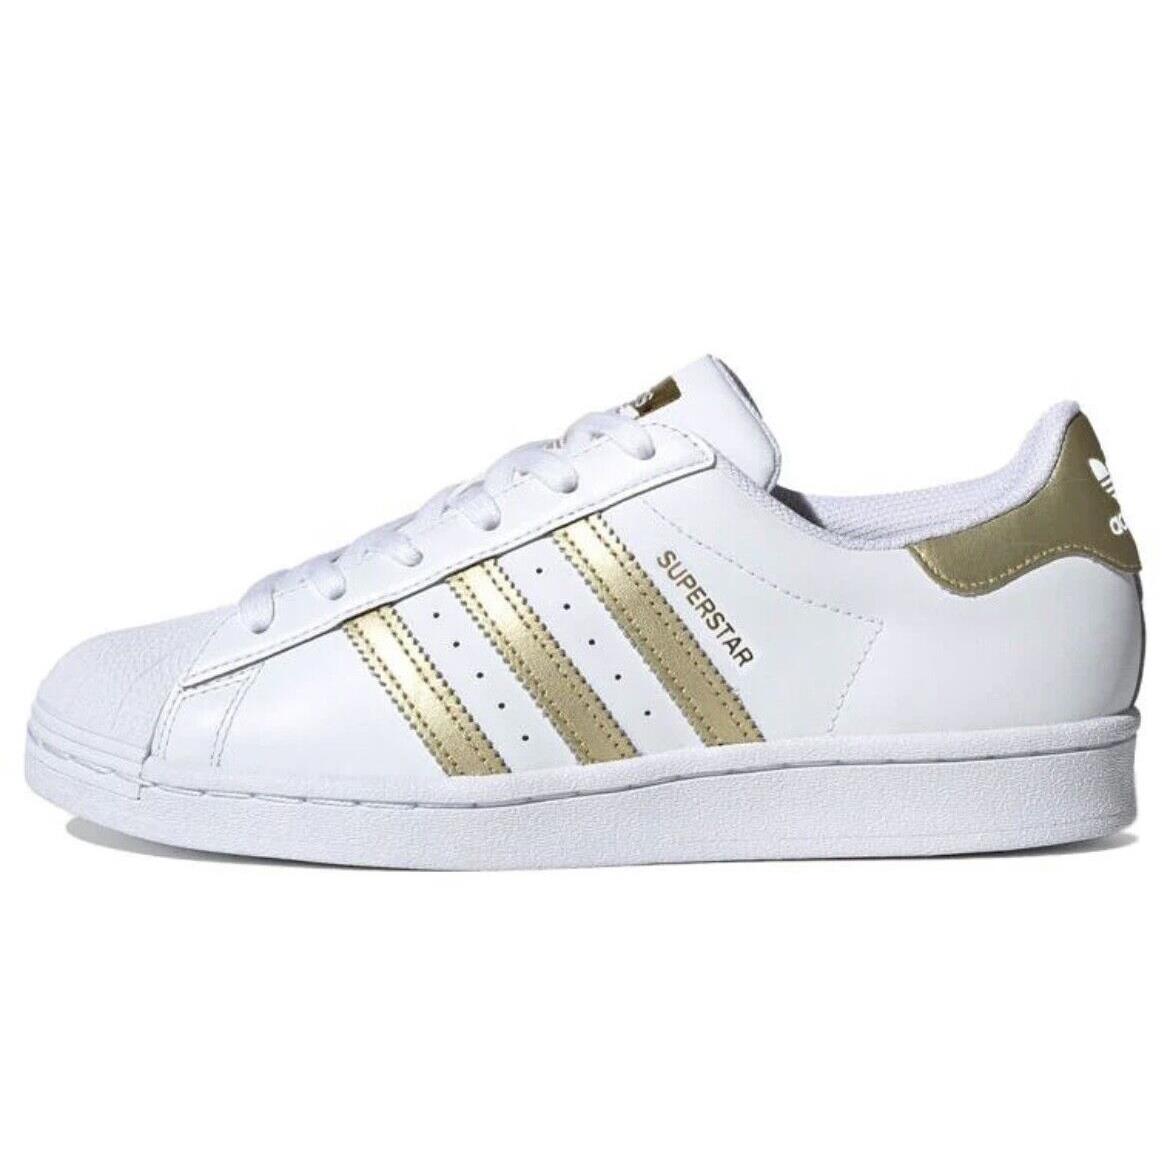 Adidas shoes Superstar - White Gold 2